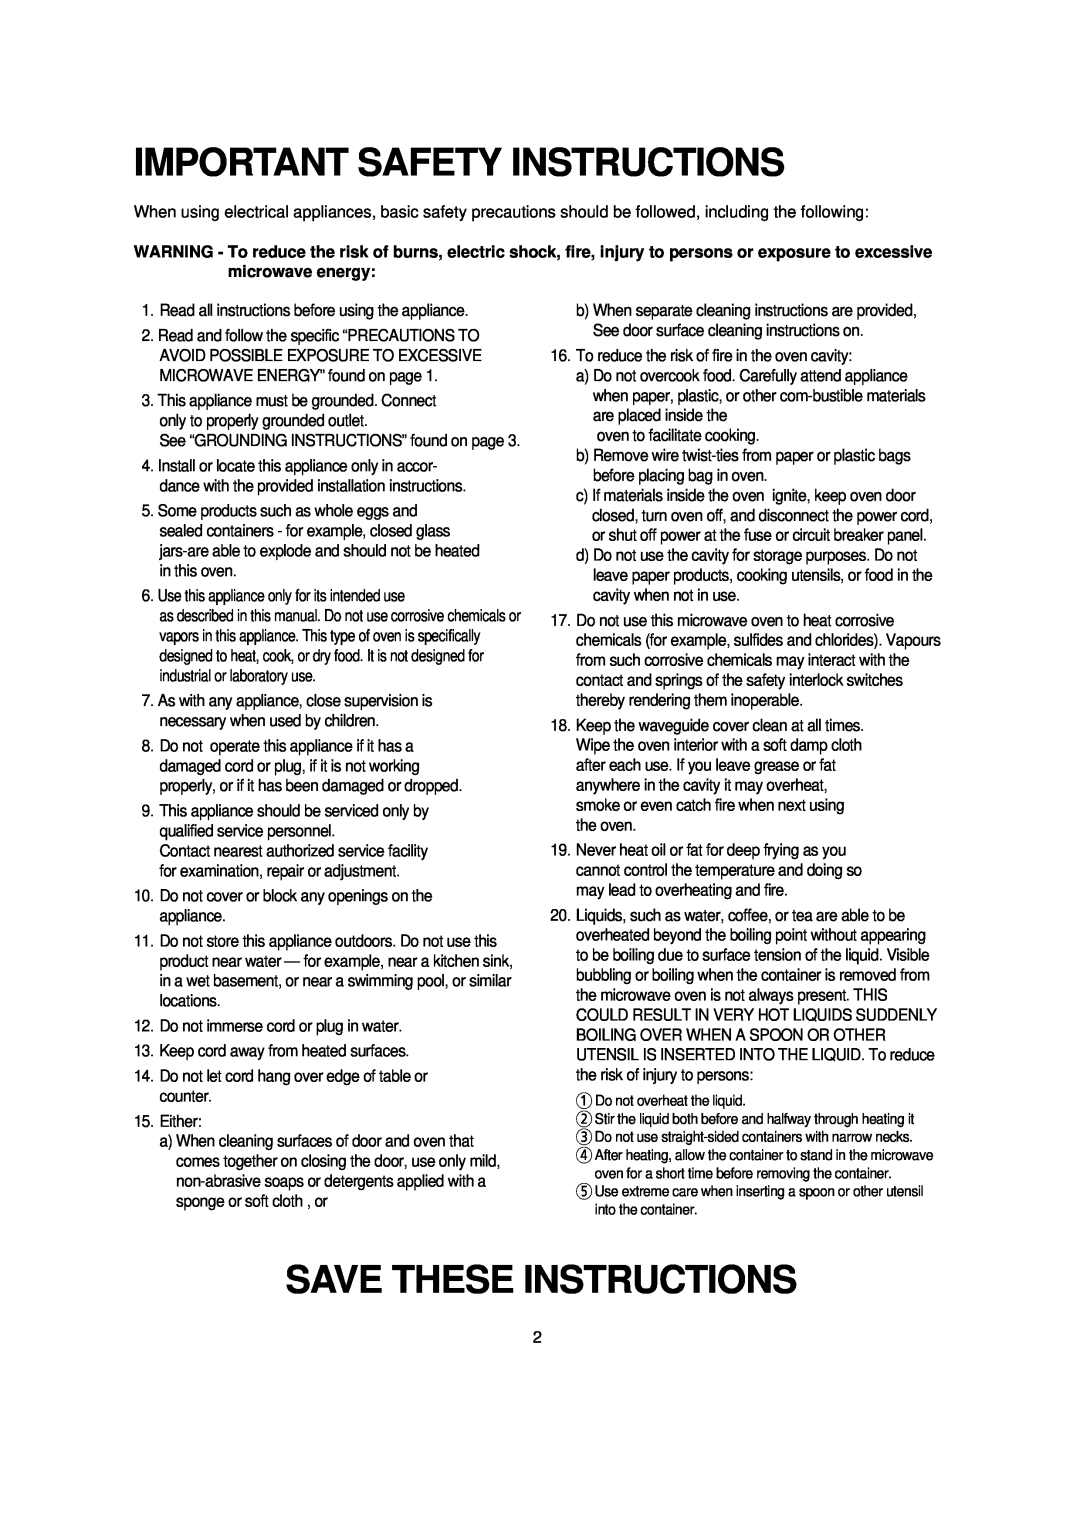 Turbo Air TMW-1100M manual Important Safety Instructions, Save These Instructions 